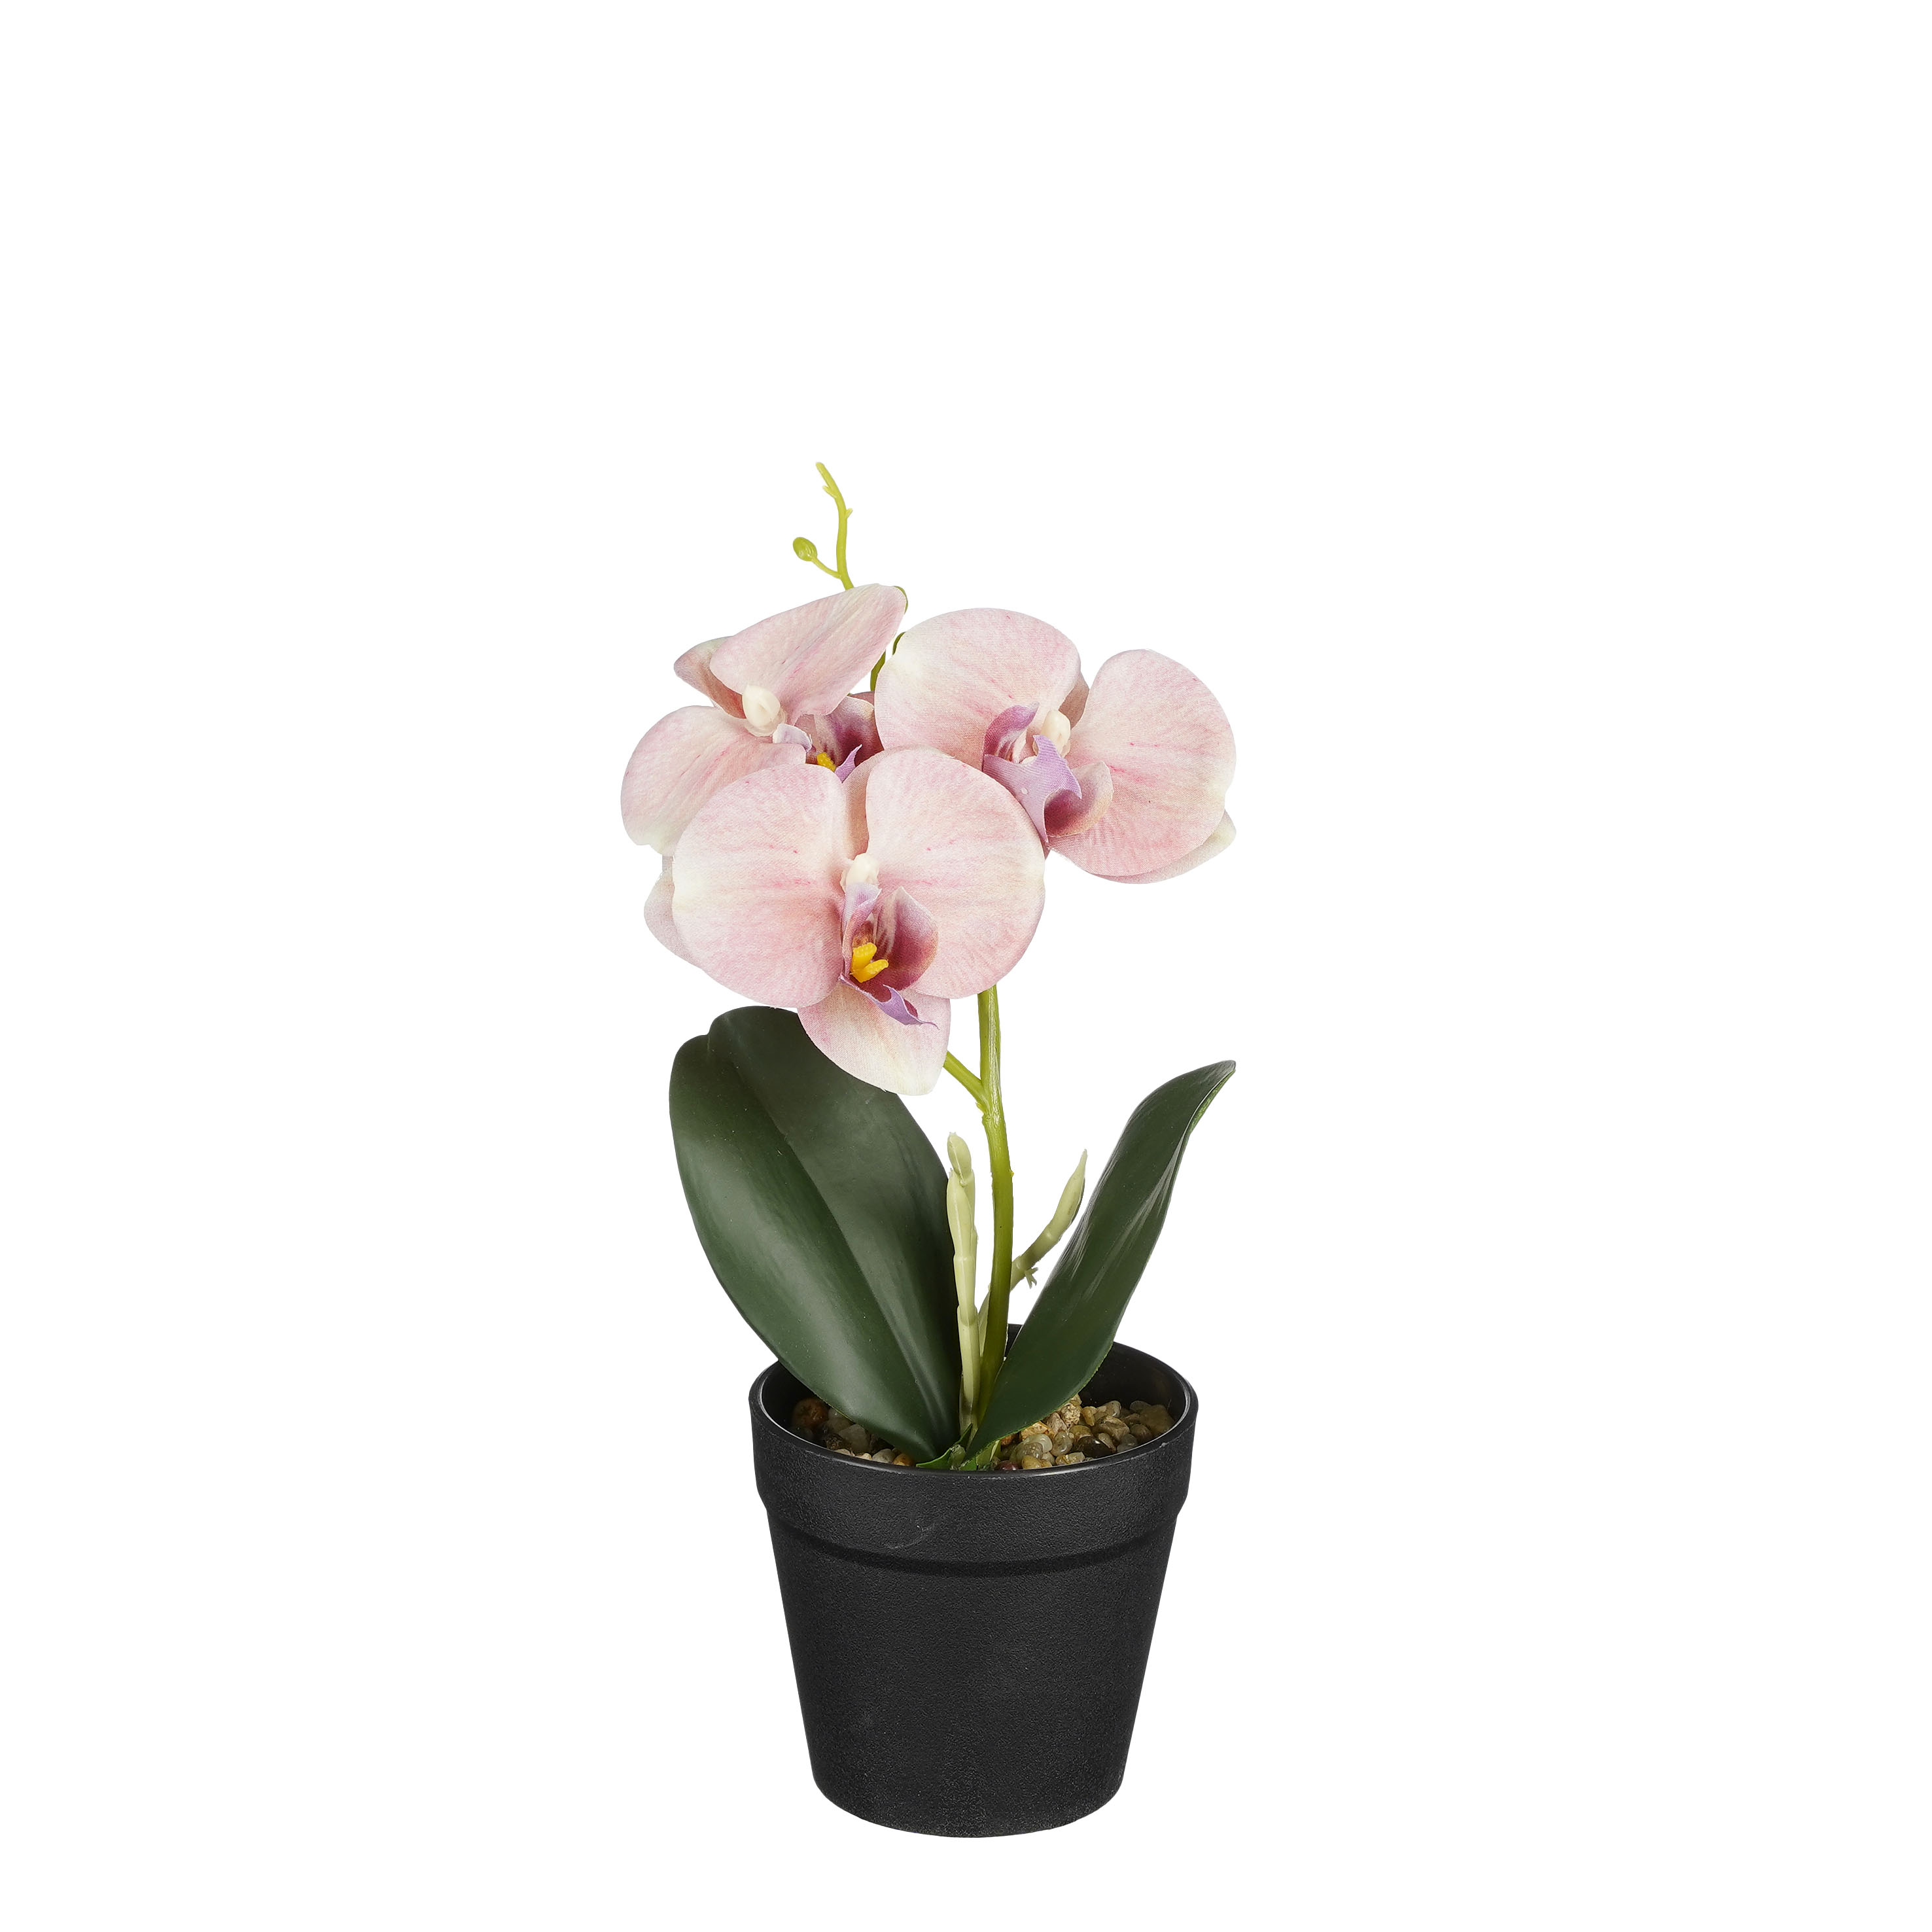 Home - English - Orchitop® - DER Orchideen-Topf